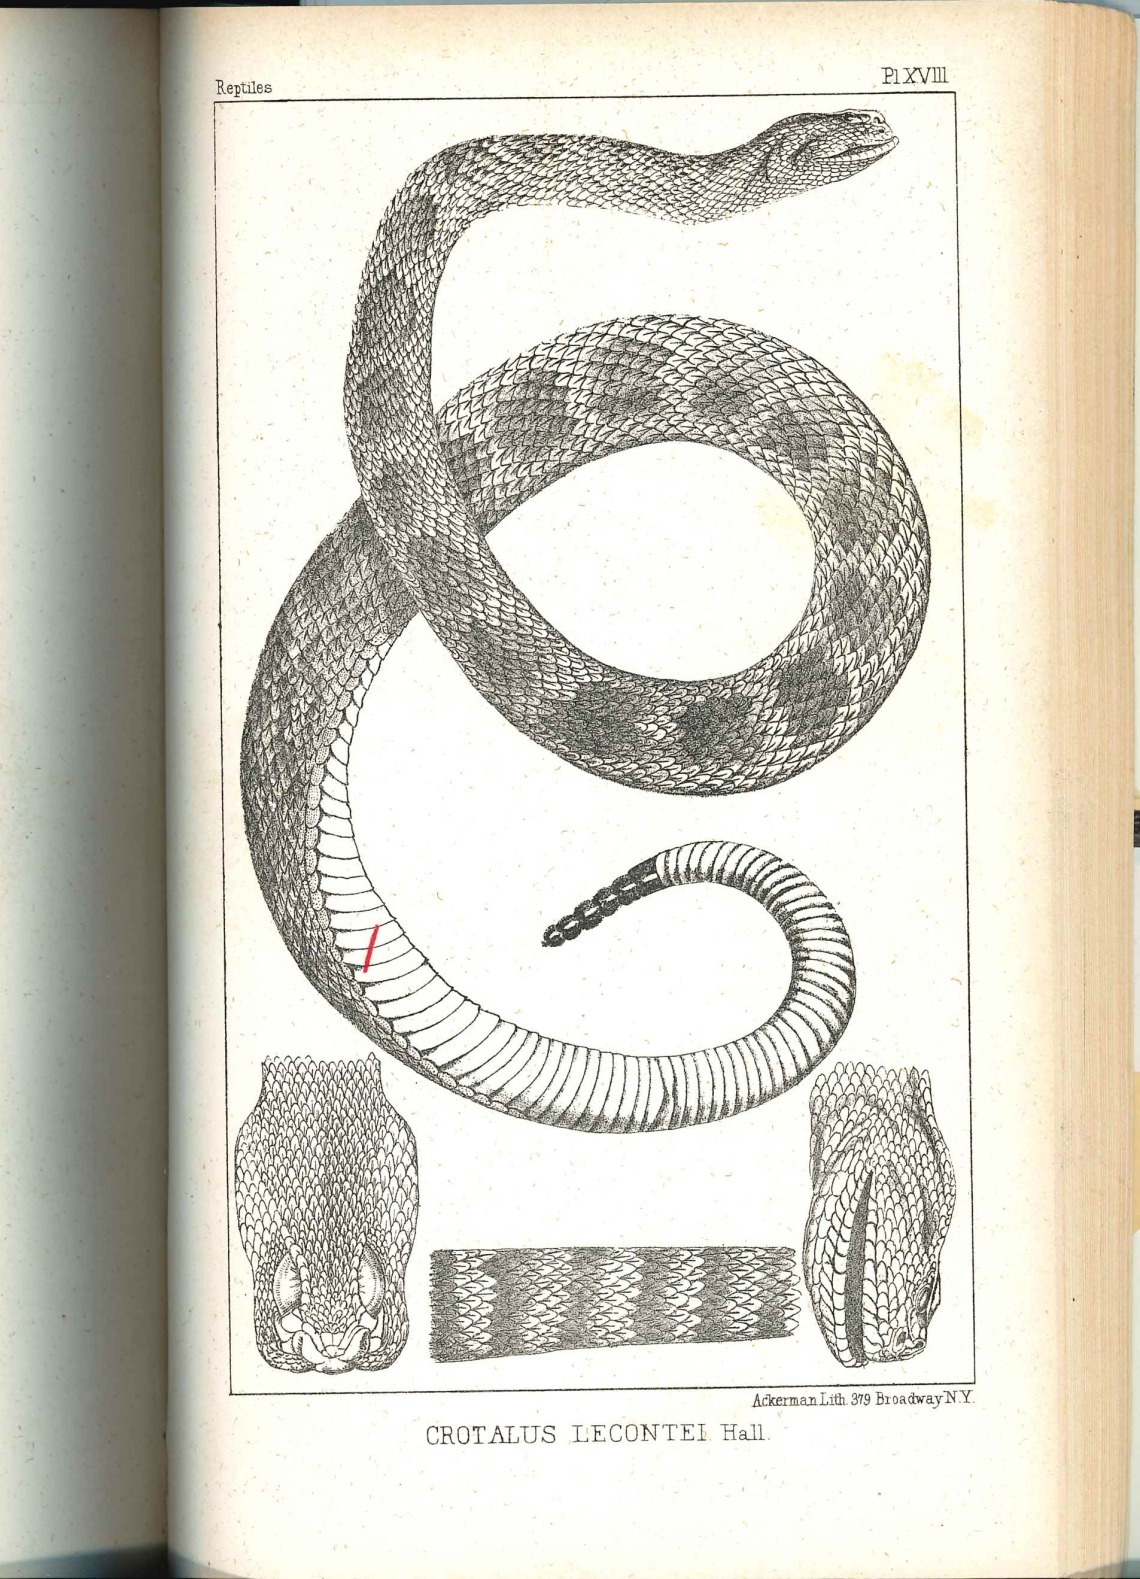 book with snake picture on it